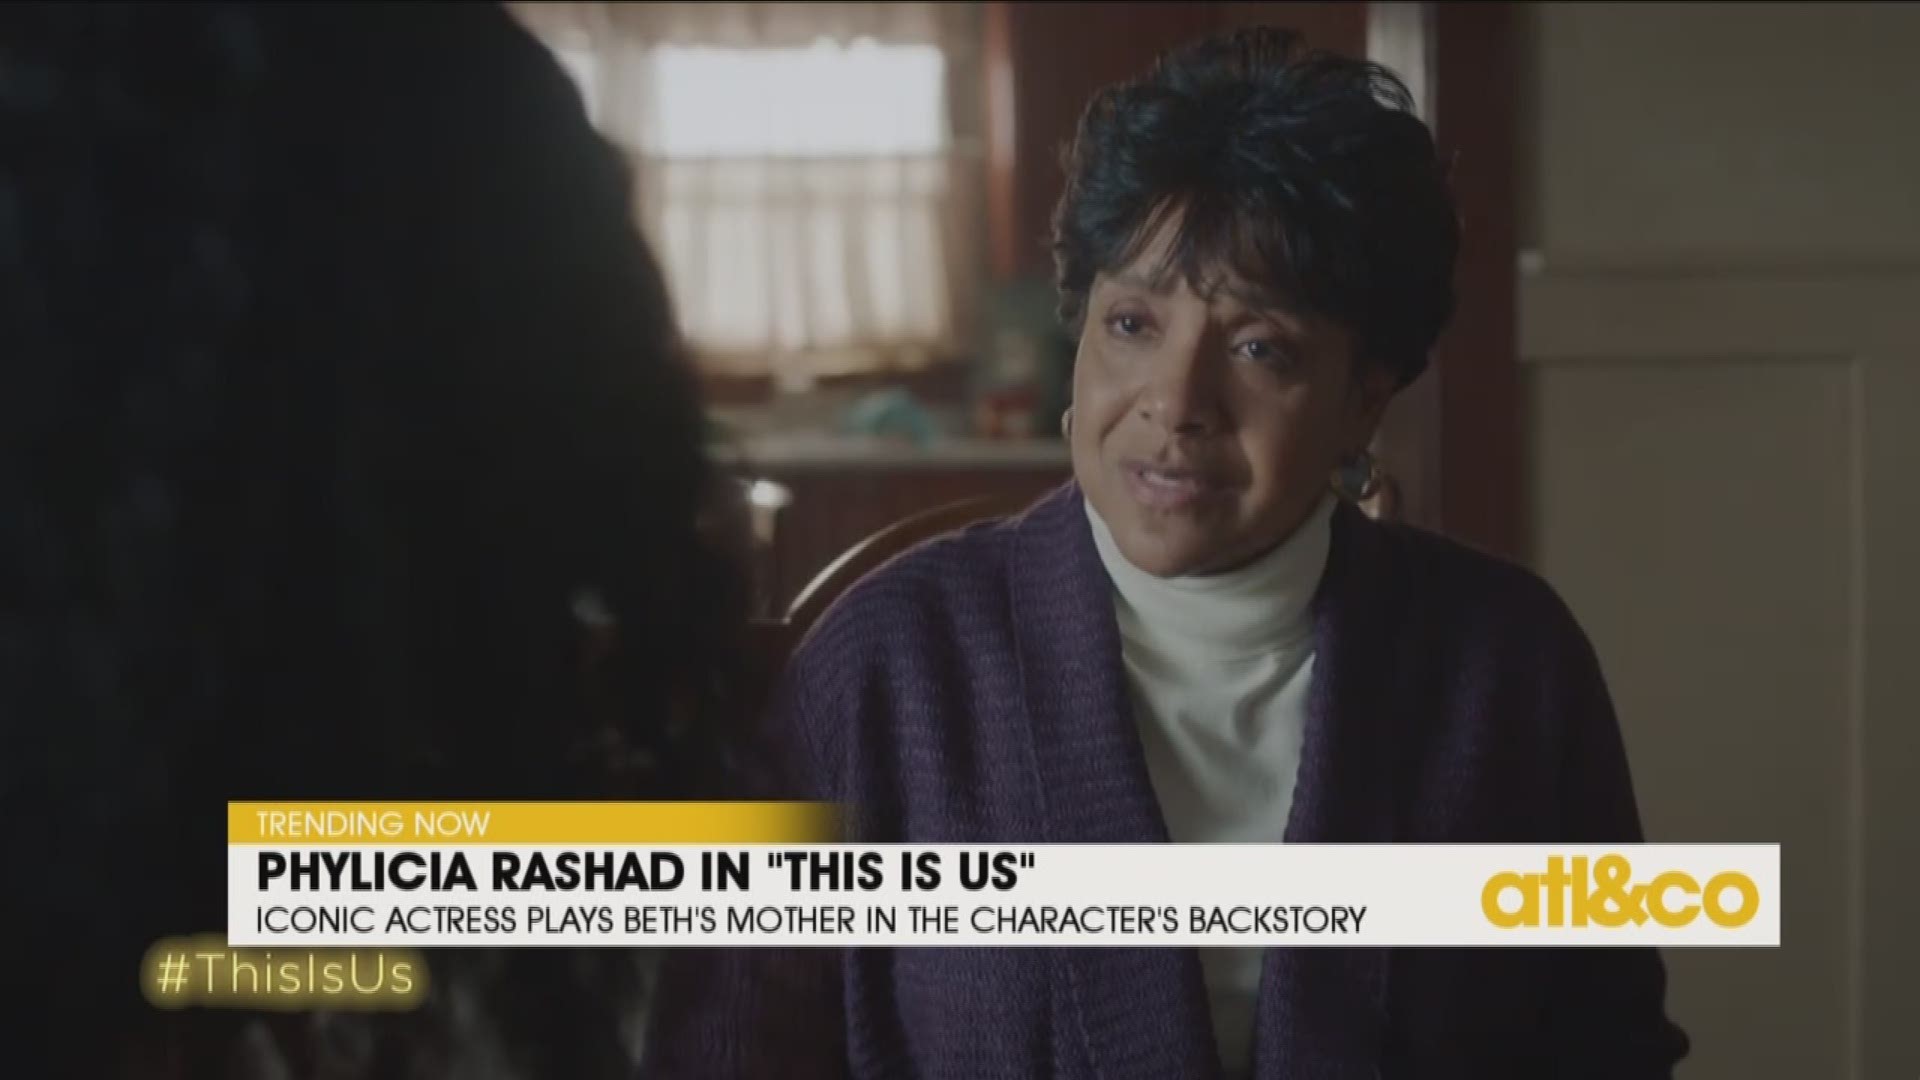 Phylicia Rashad on "This Is Us"